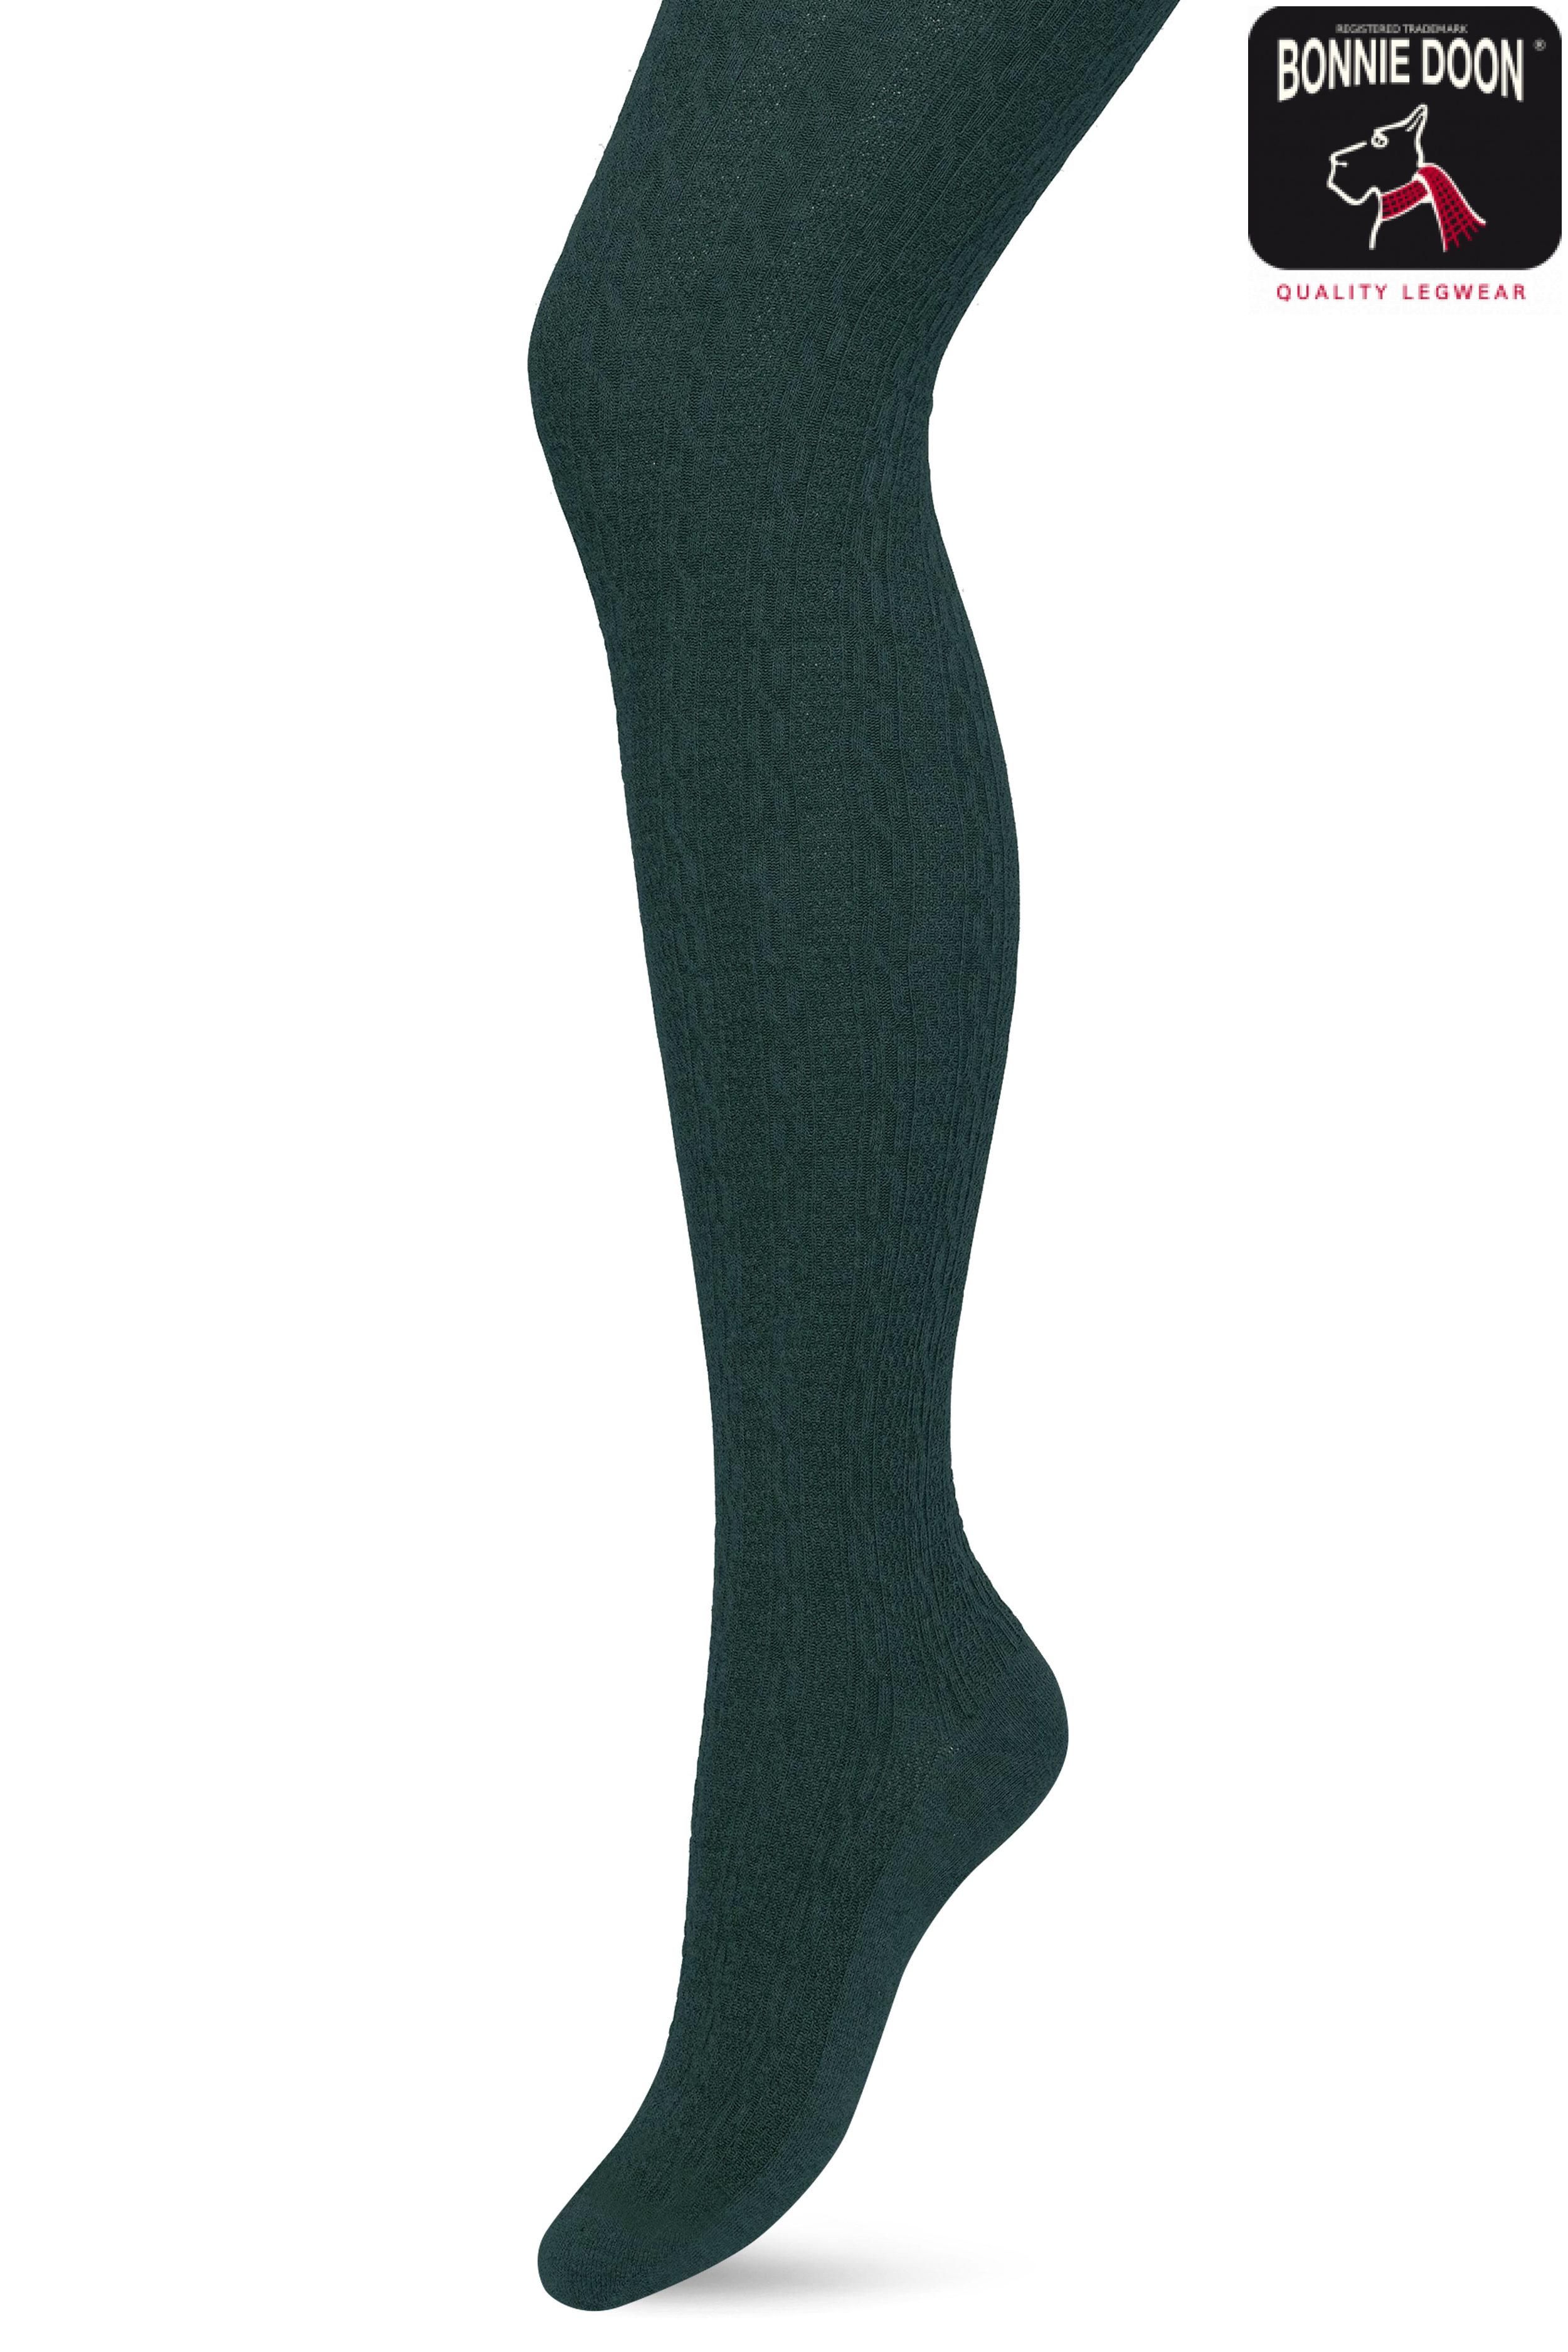 Women's Tights from Bonnie Doon - Elegance and Comfort Combined